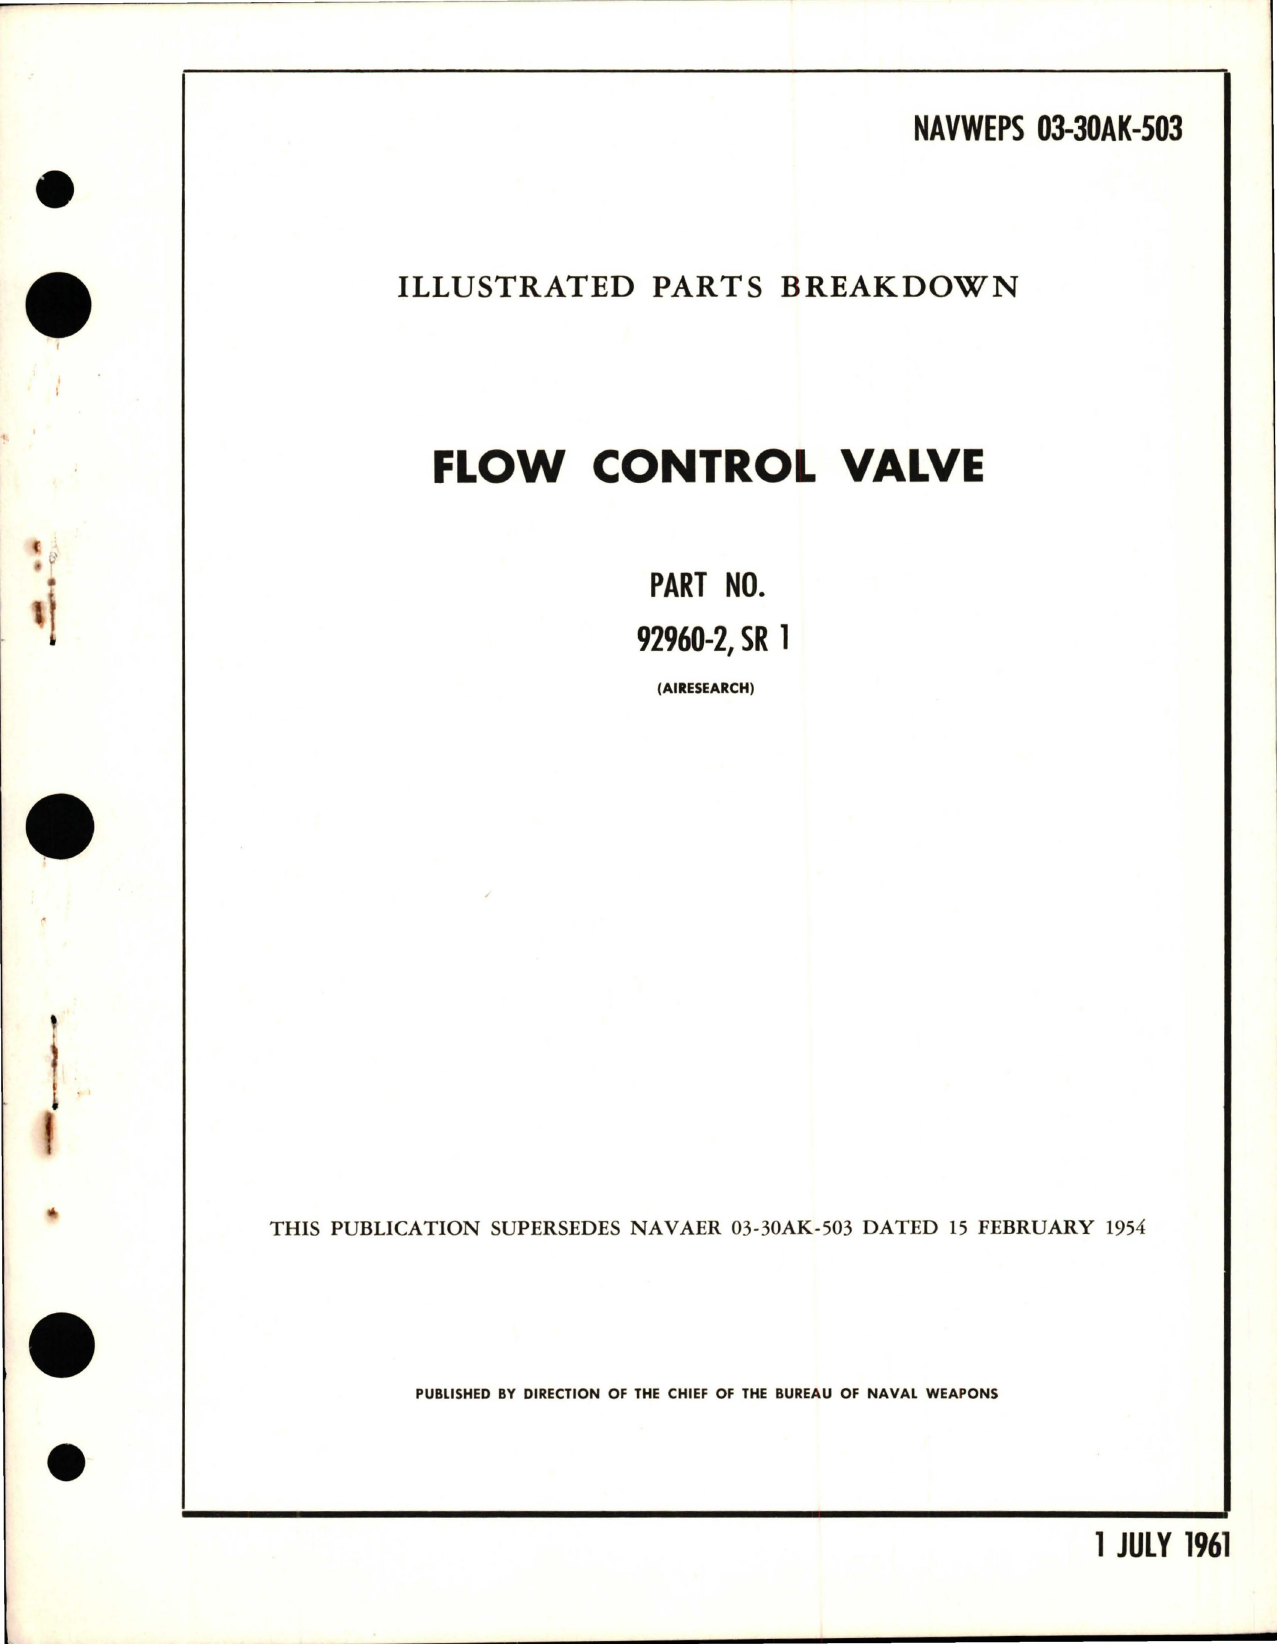 Sample page 1 from AirCorps Library document: Illustrated Parts Breakdown for Flow Control Valve - Part 92960-2 SR 1